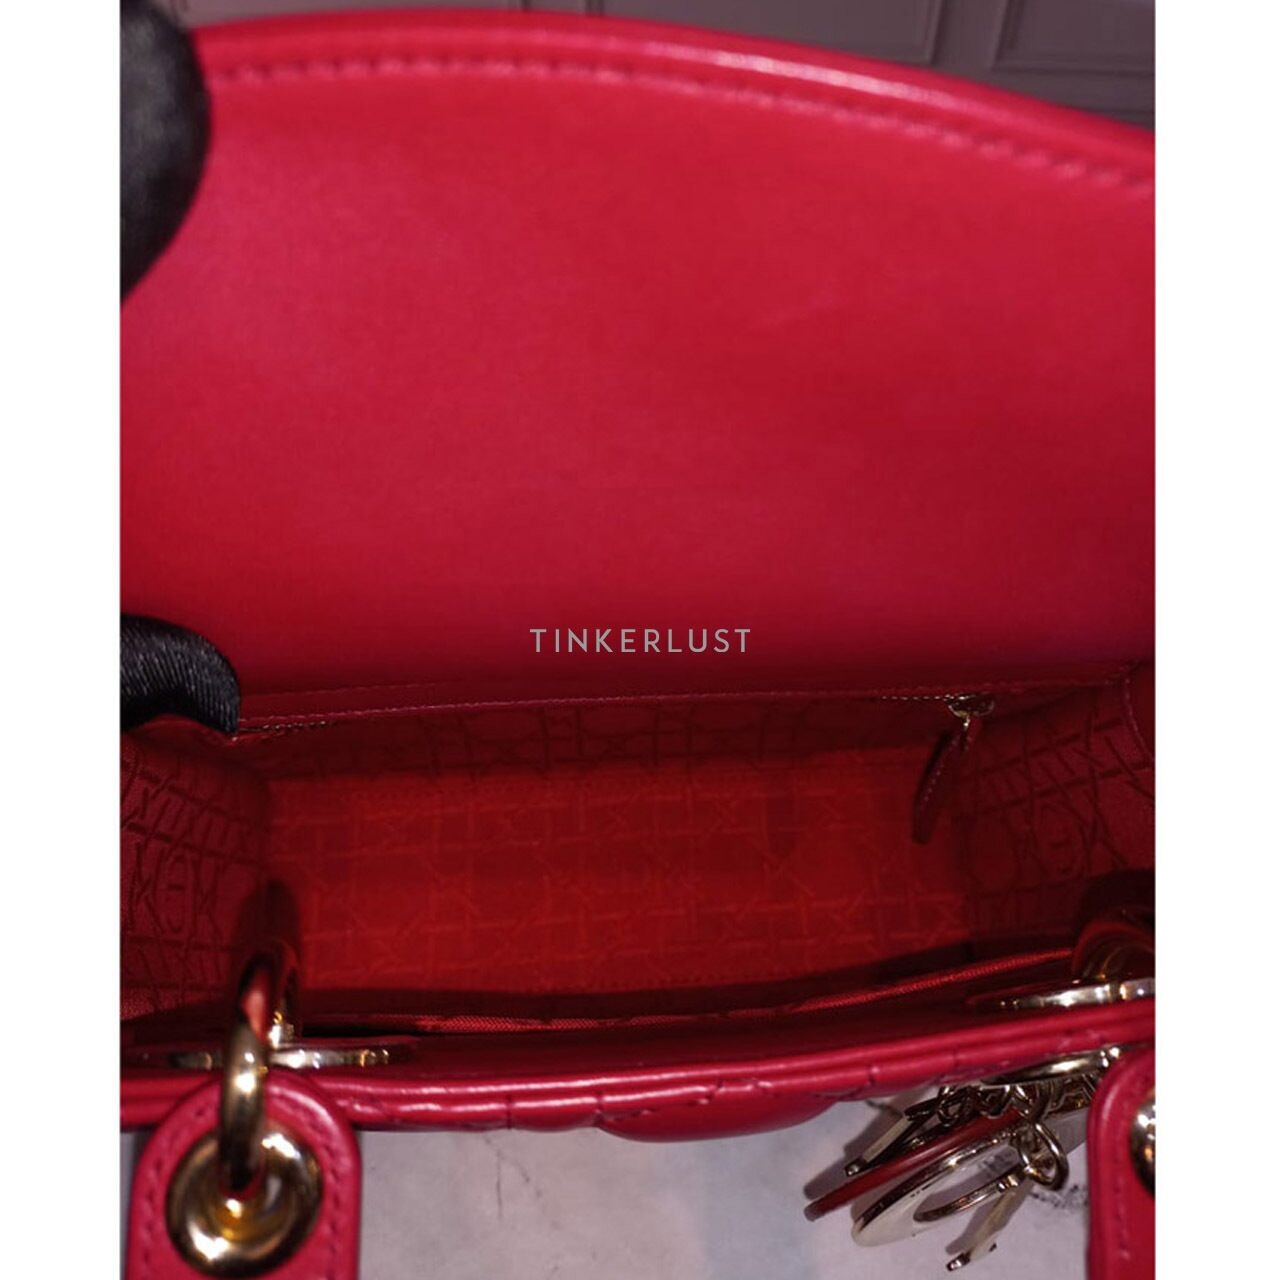 Christian Dior Lady Dior Small Red 2020 GHW Satchel